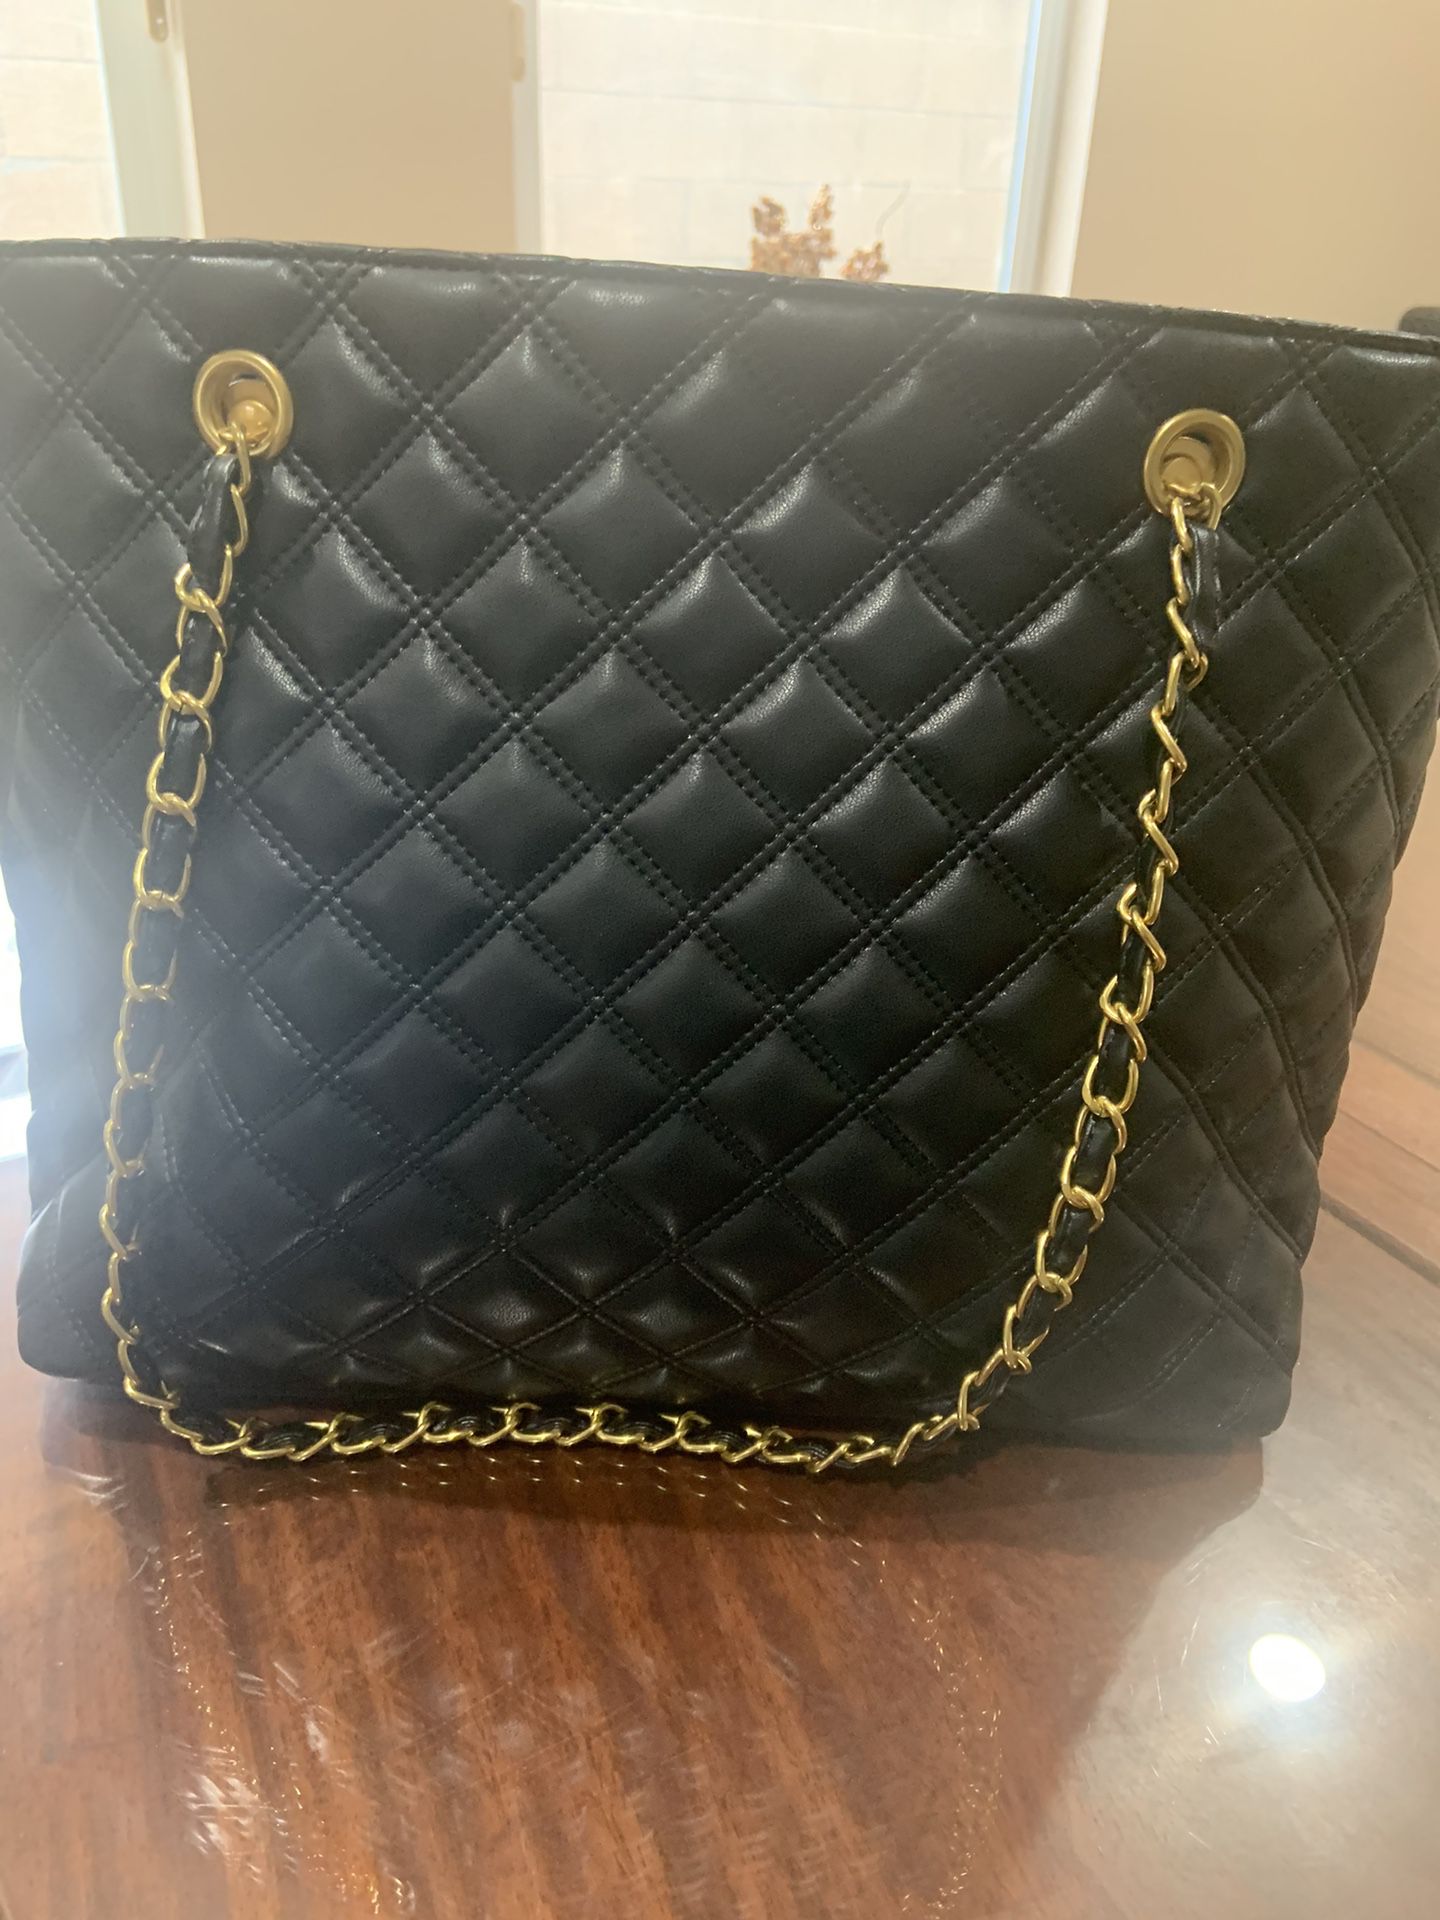 Chanel ( Originally Purchased On Offer Up)